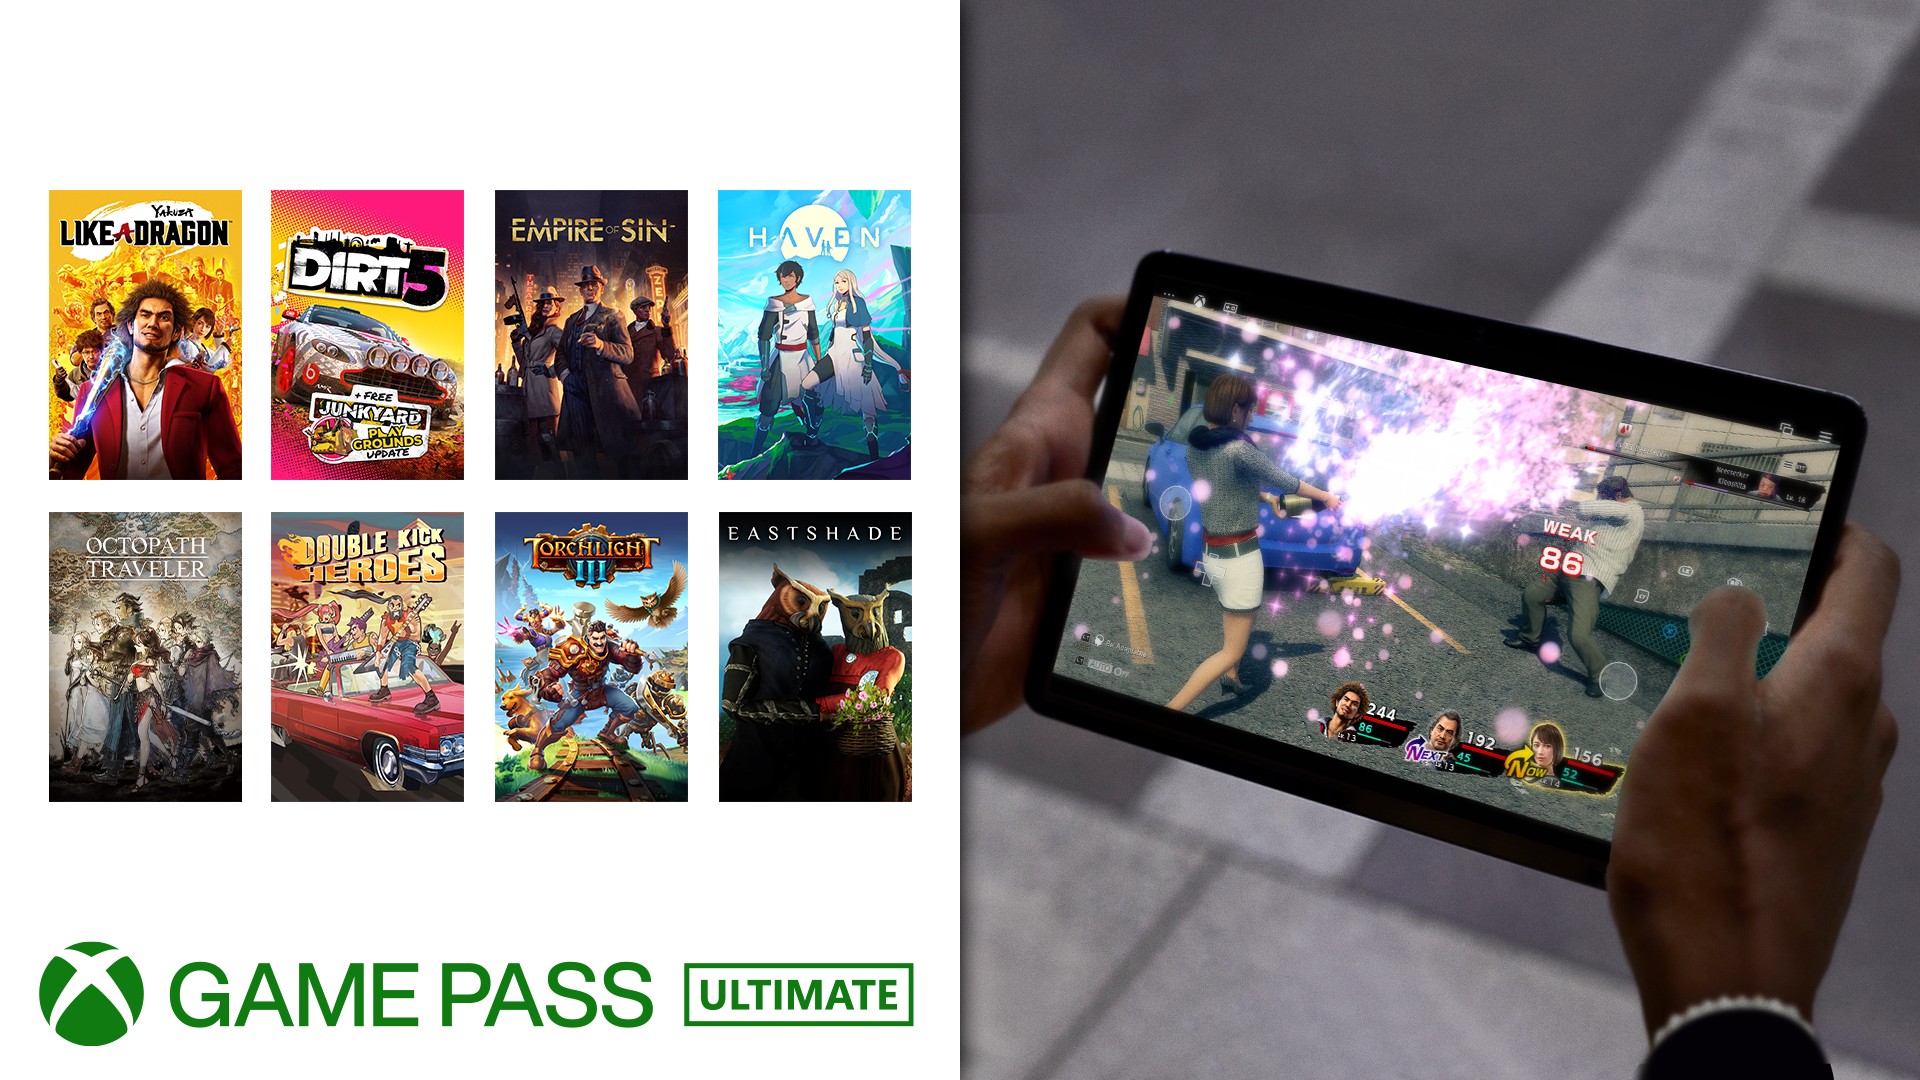 Xbox Game Pass coming to PC - Polygon